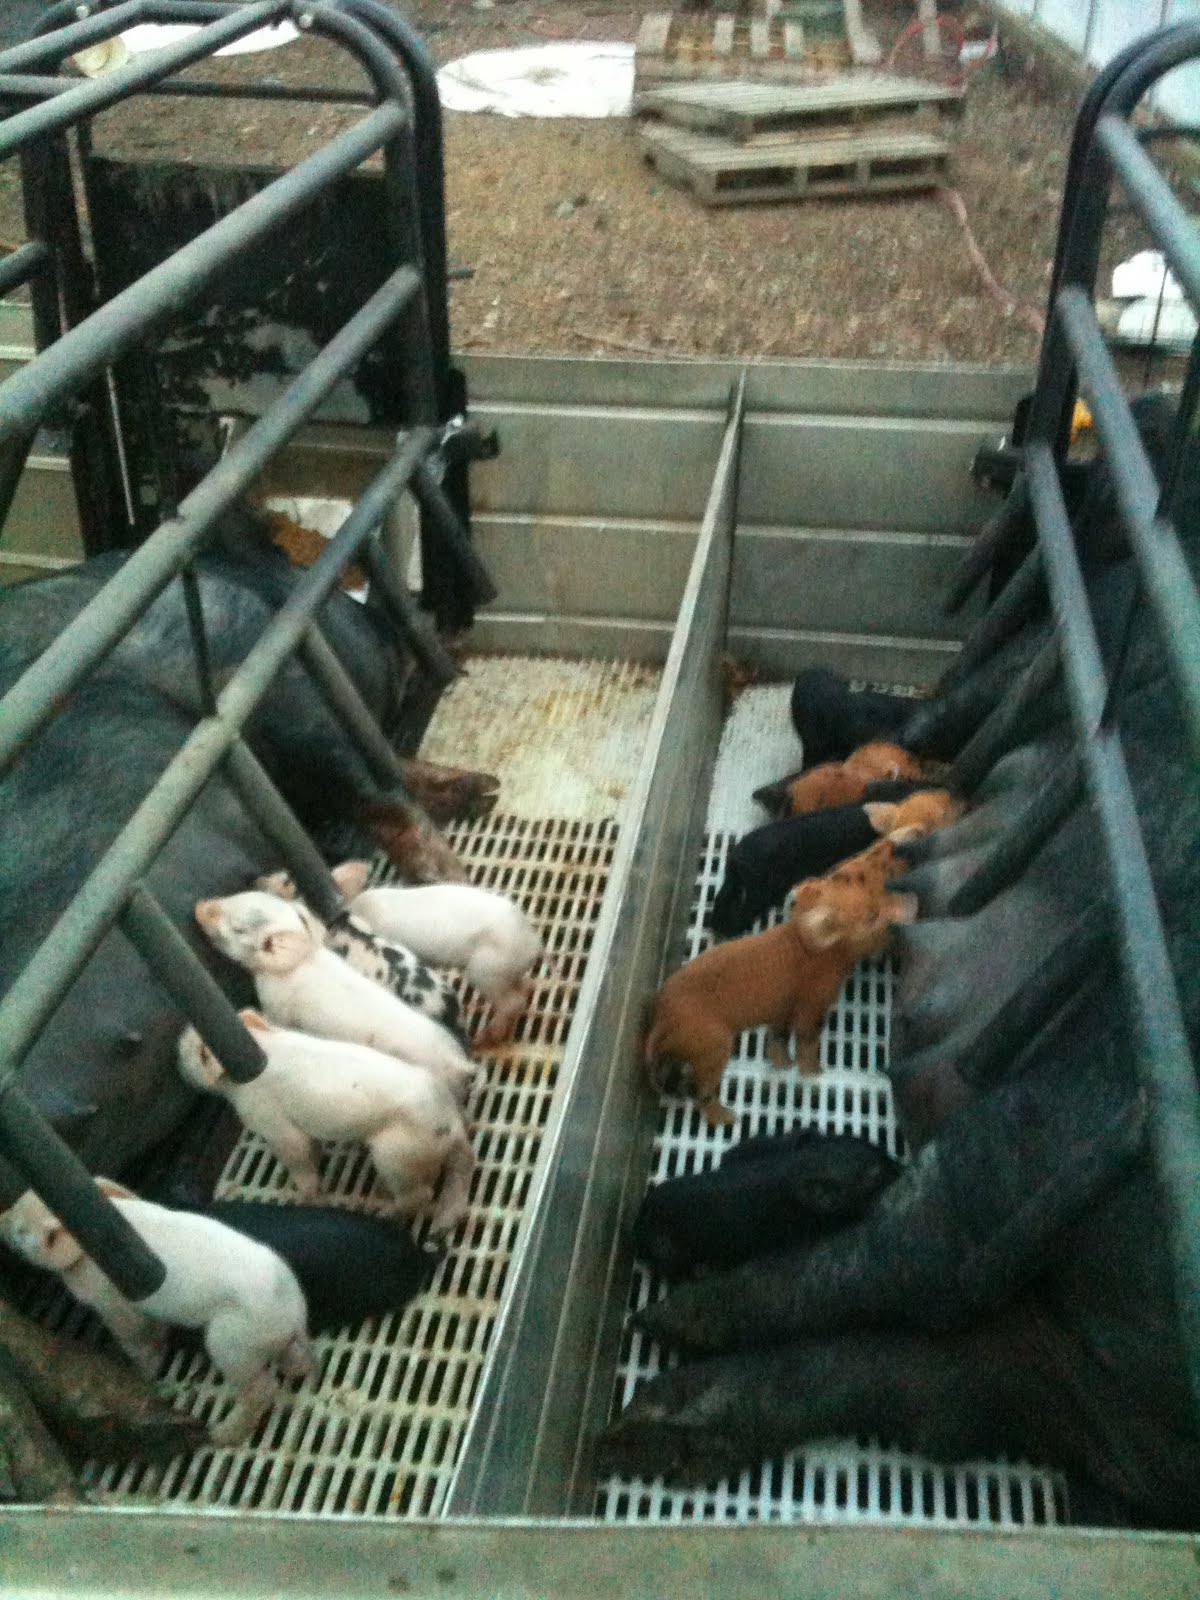 Notes on using a farrowing crate.